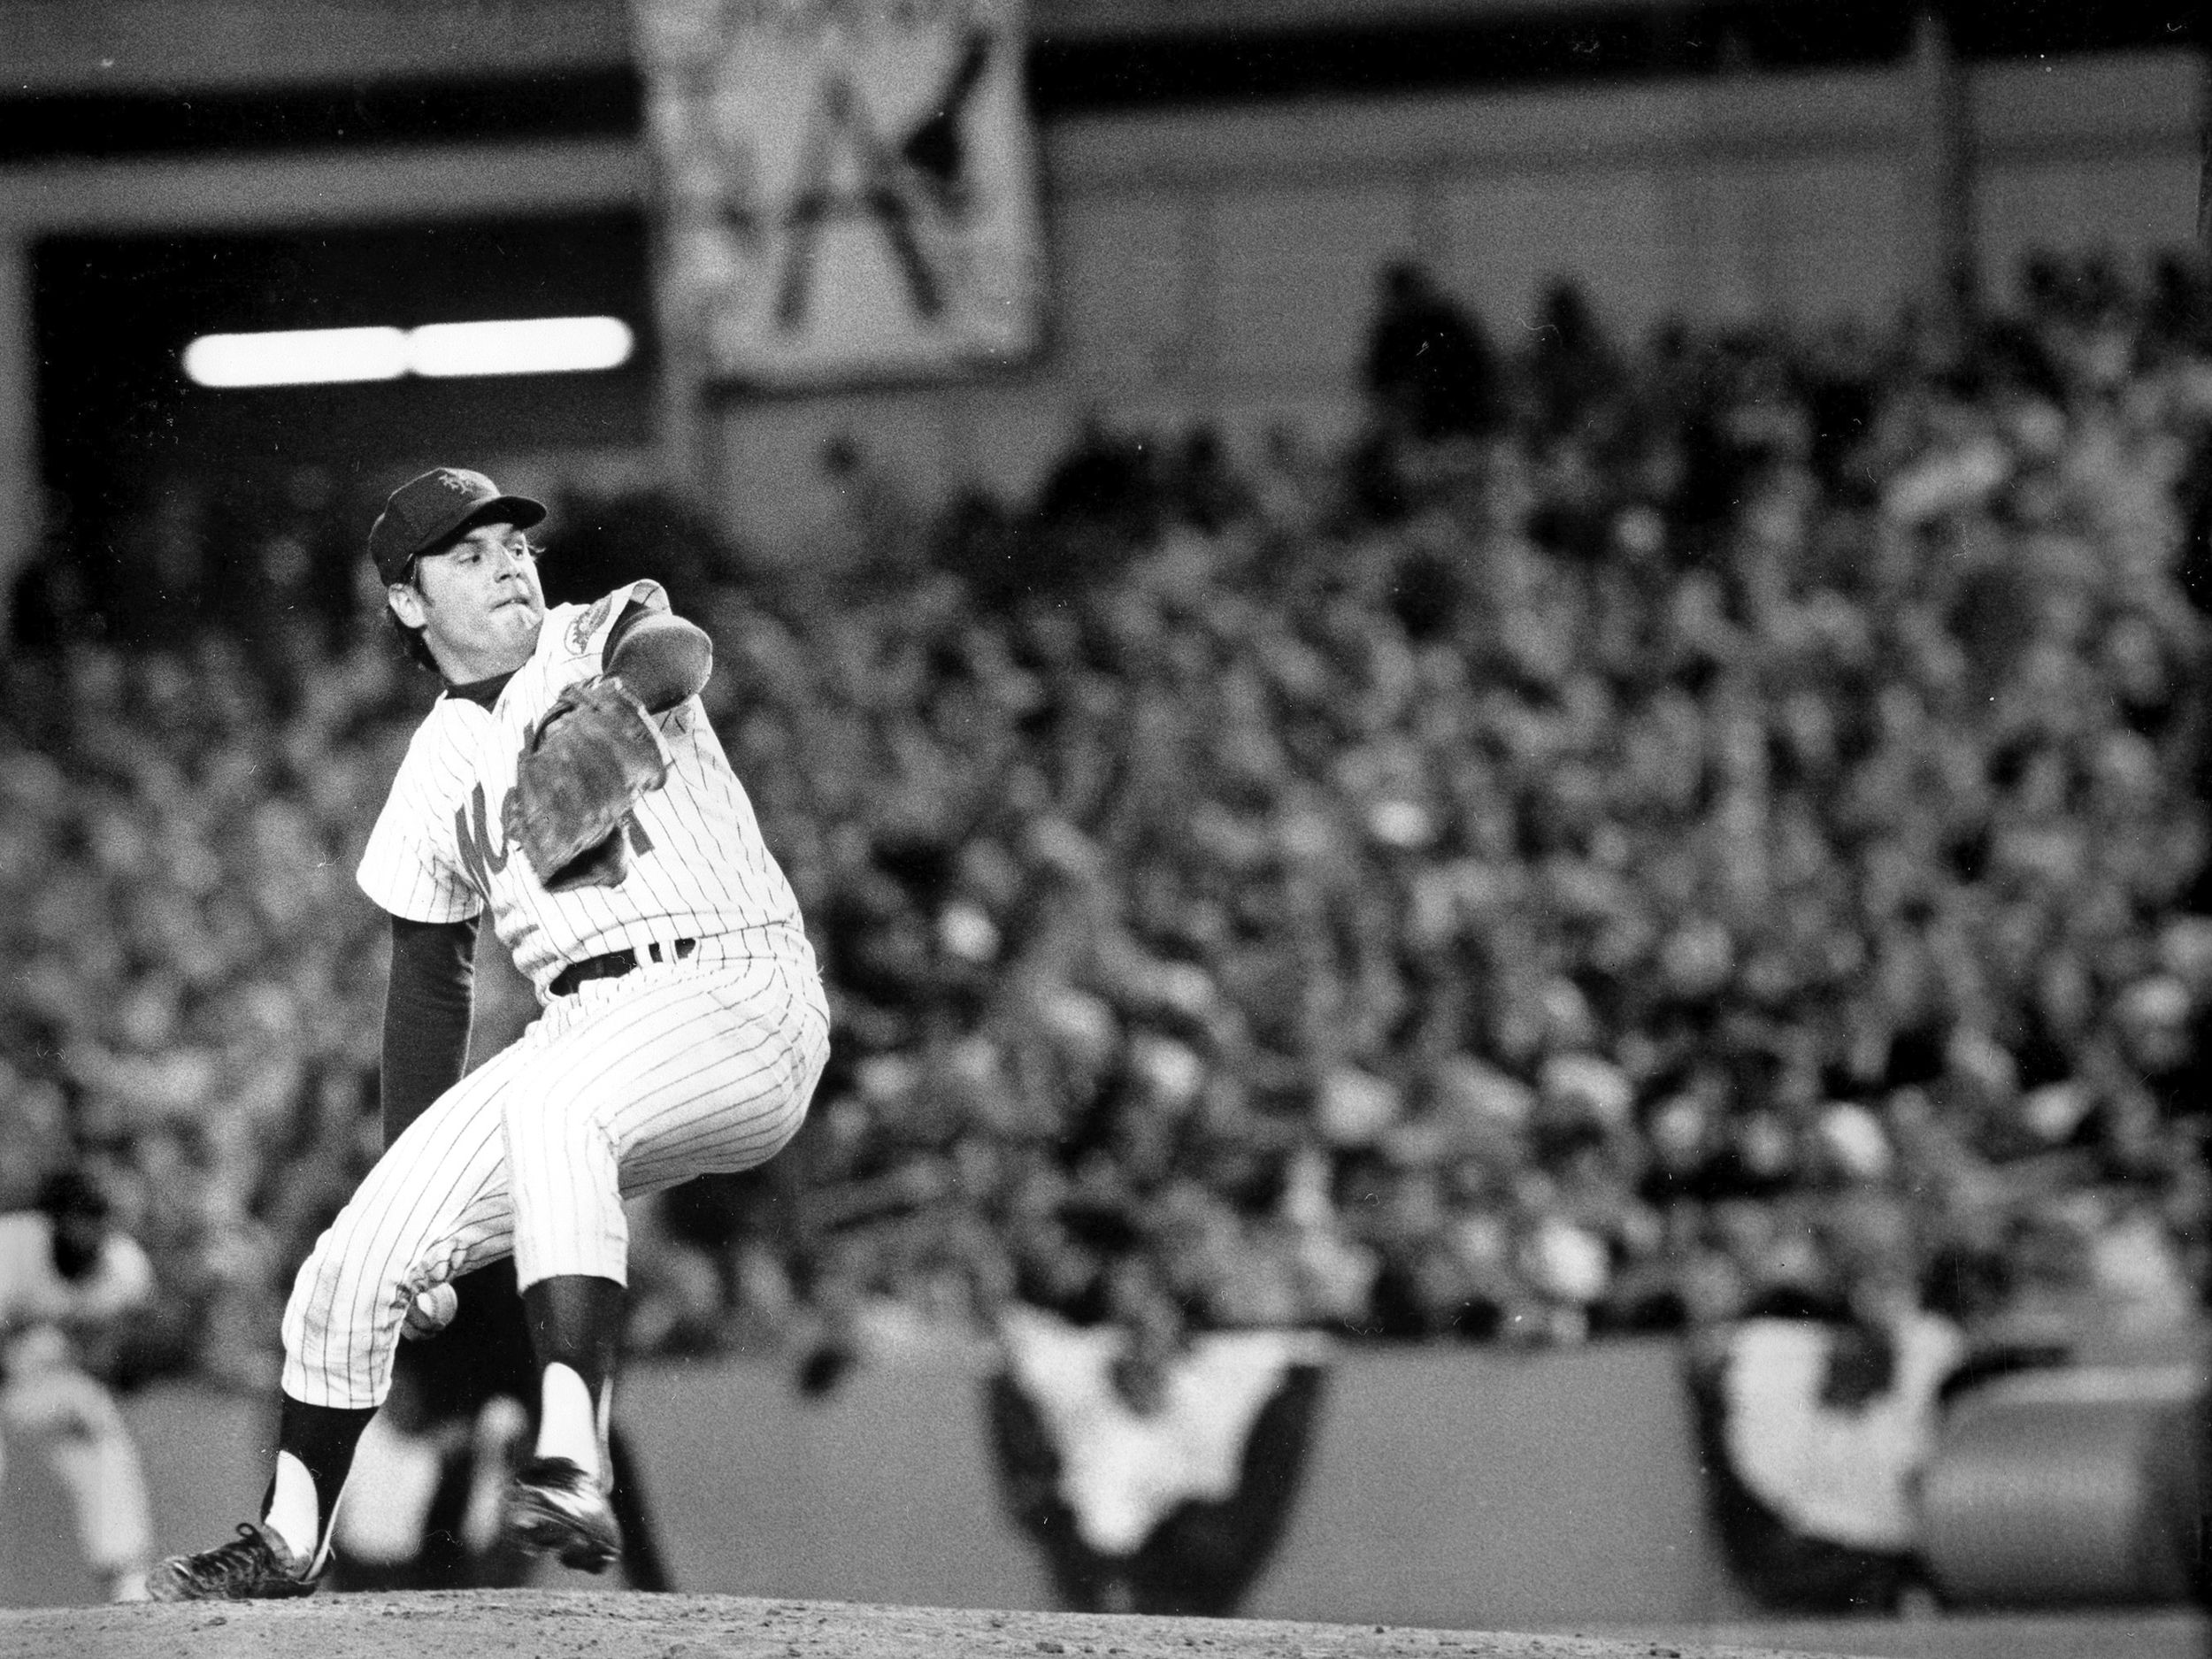 Tom Seaver, the Hall of Fame pitcher who was the heart of the